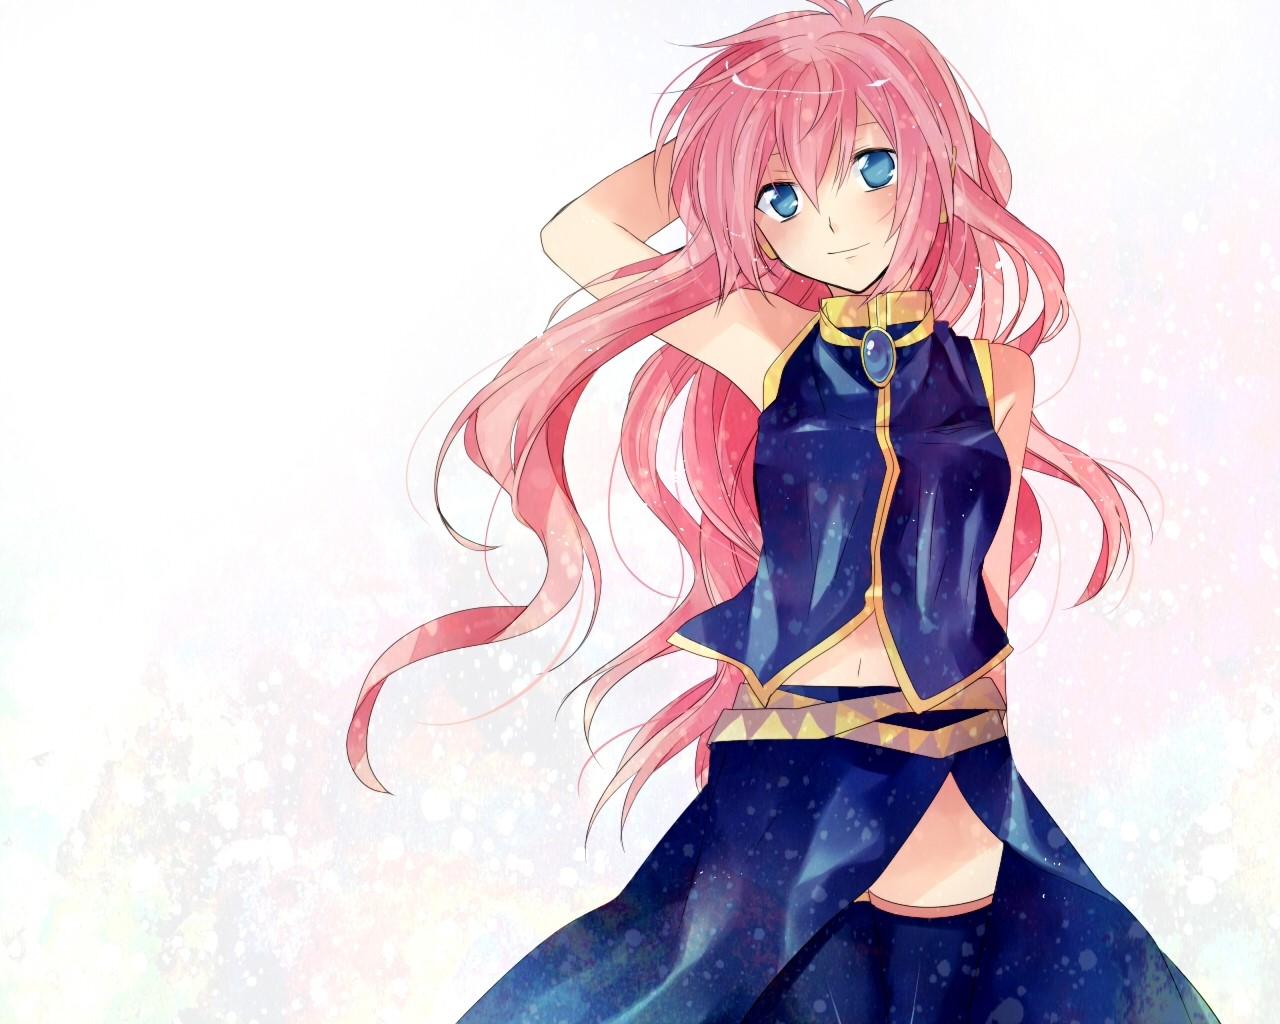 Aesthetic Anime Girls Pink Hair Wallpapers - Wallpaper Cave 380